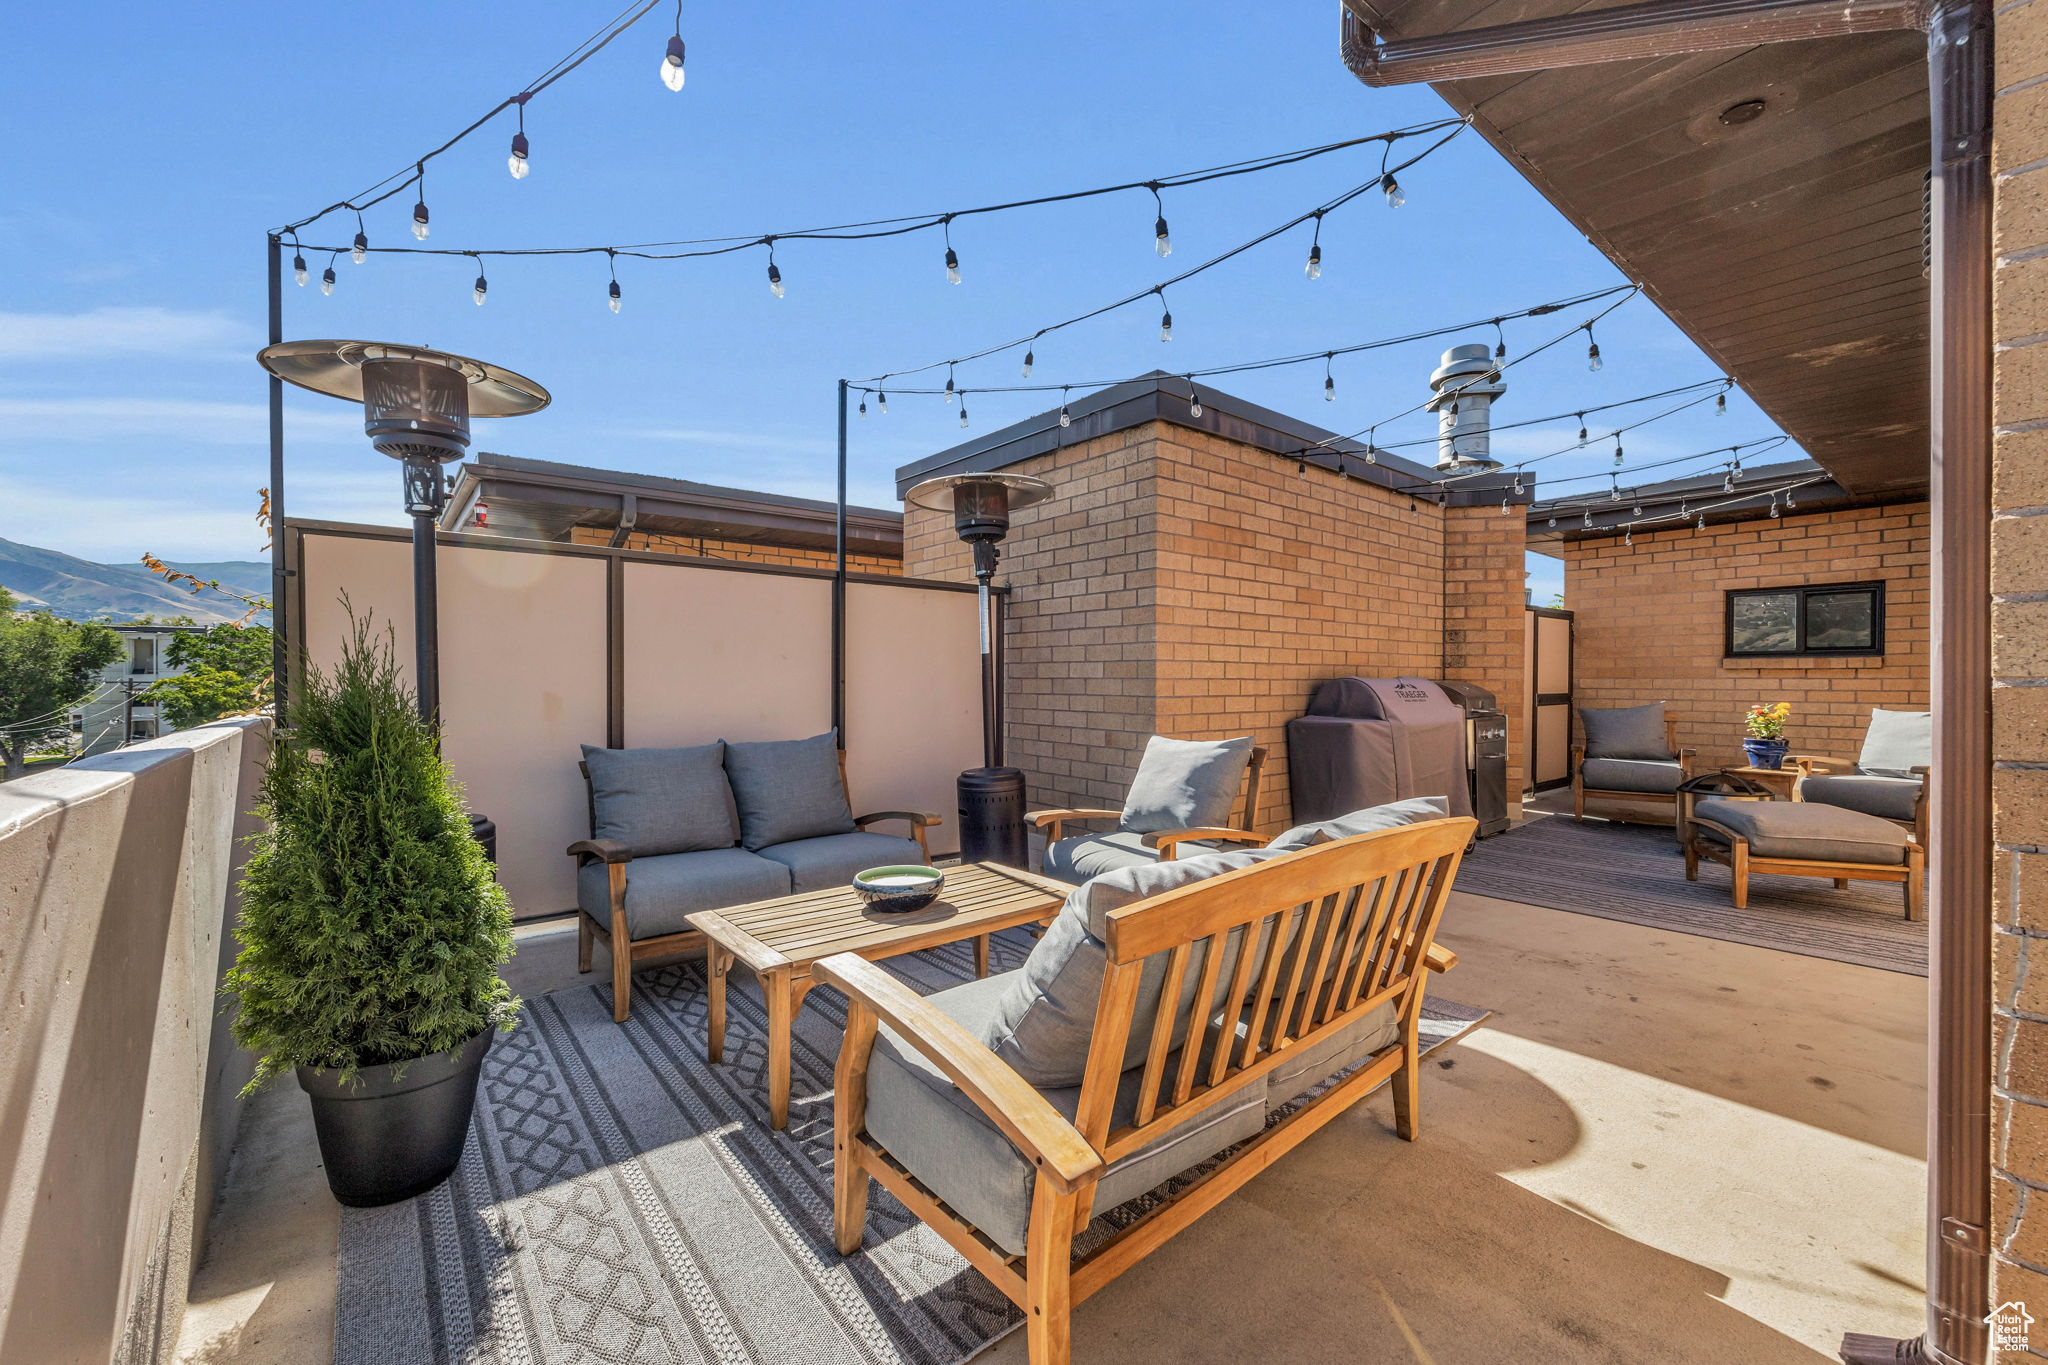 700 Sq Ft private terrace with an outdoor living space with cafe lights, and fantastic views of the city and sunset